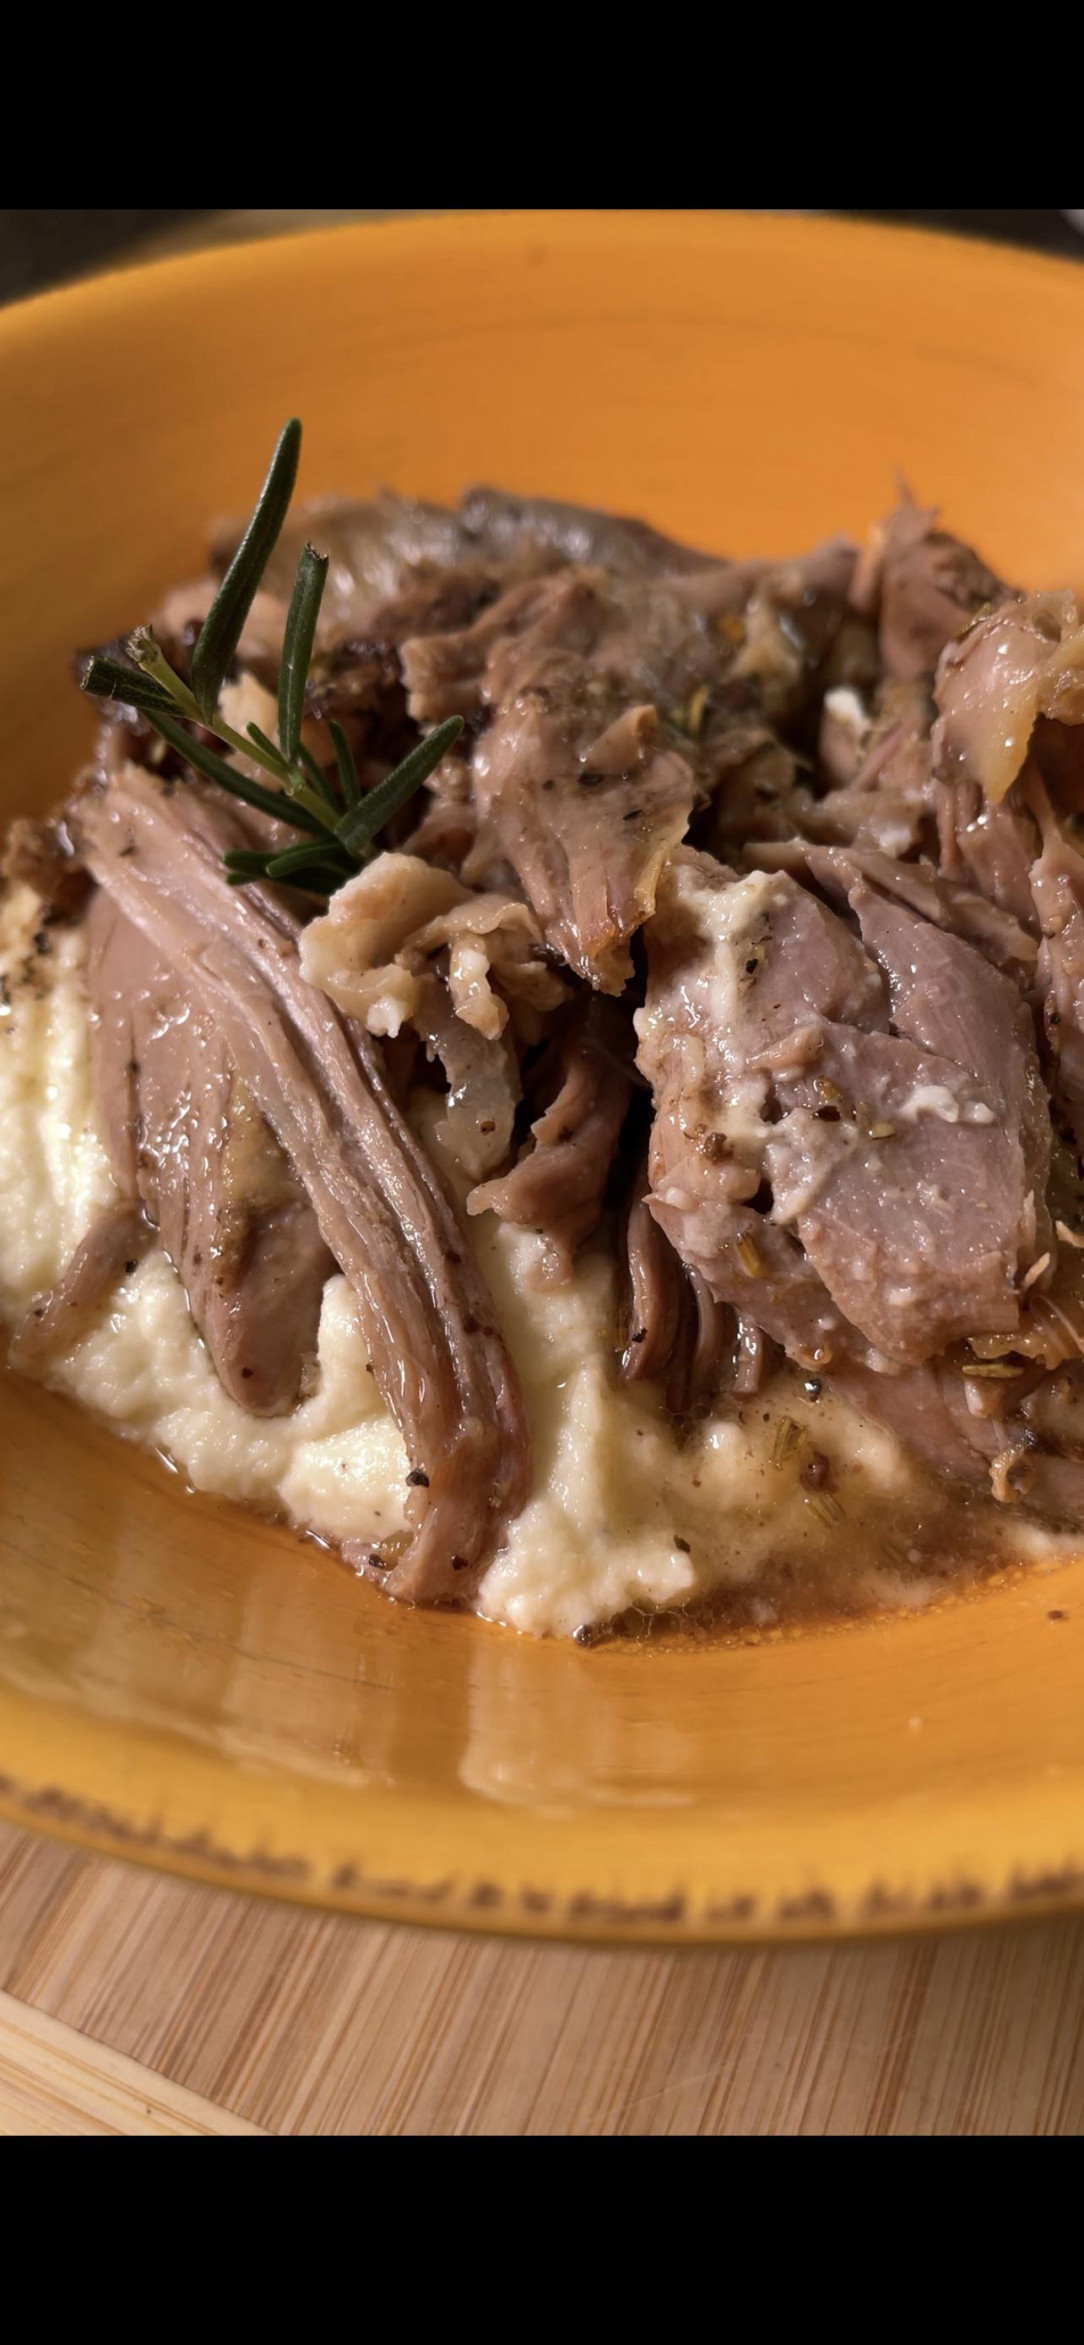 Some incredibly tender Lamb Shoulder, on a cloud of Cauliflower Purée